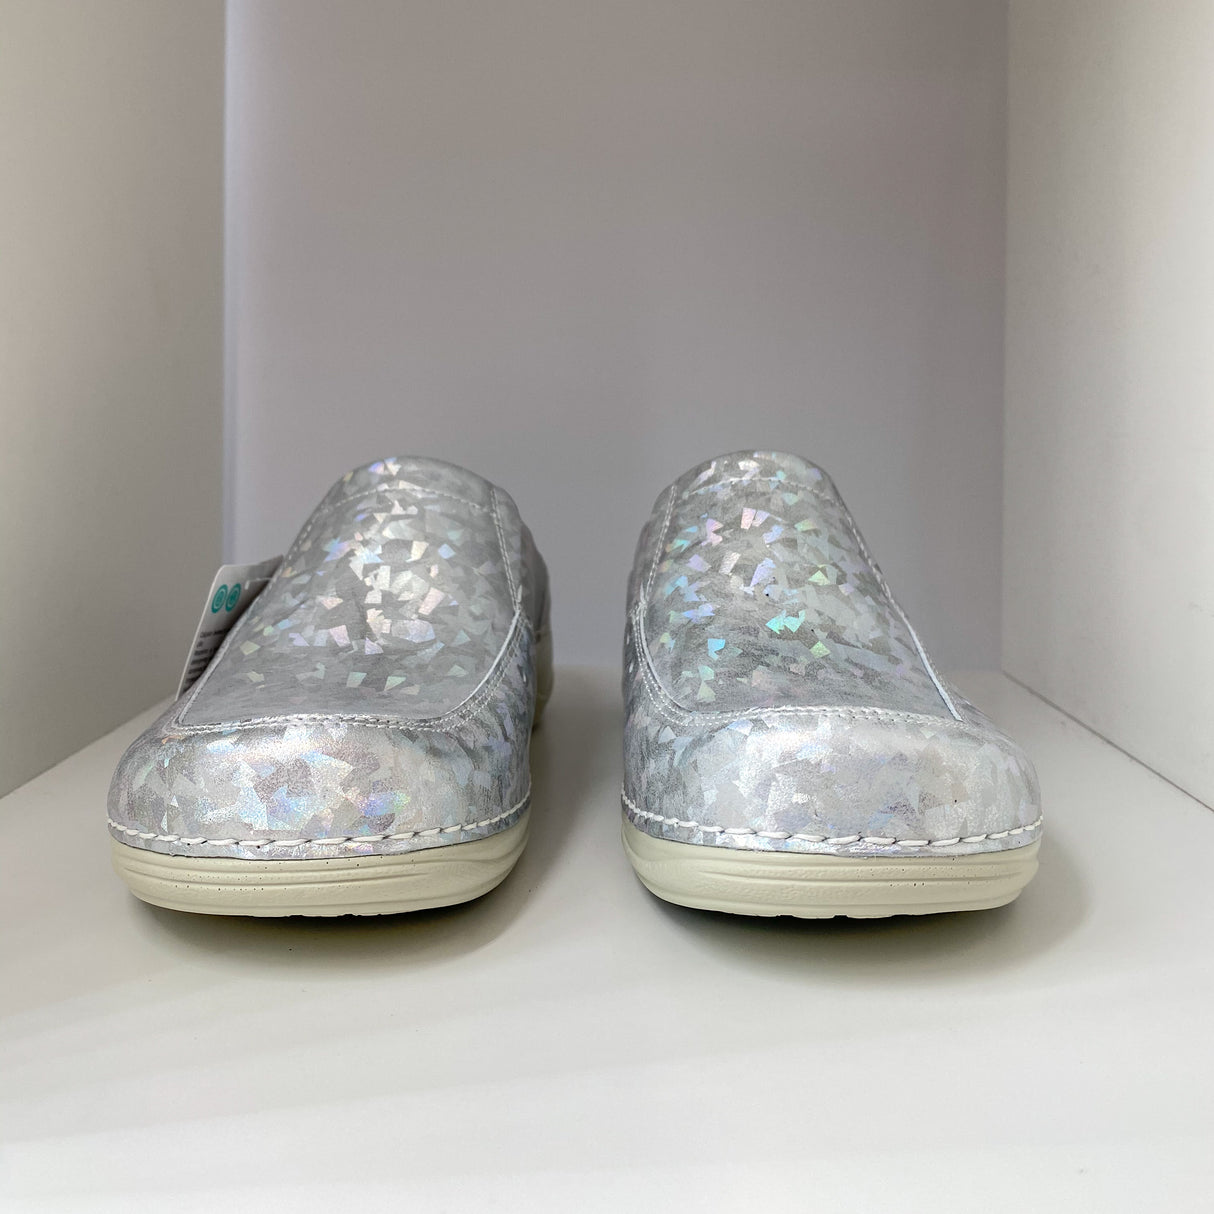 Comfort shoes for work | SILVER | Berlin